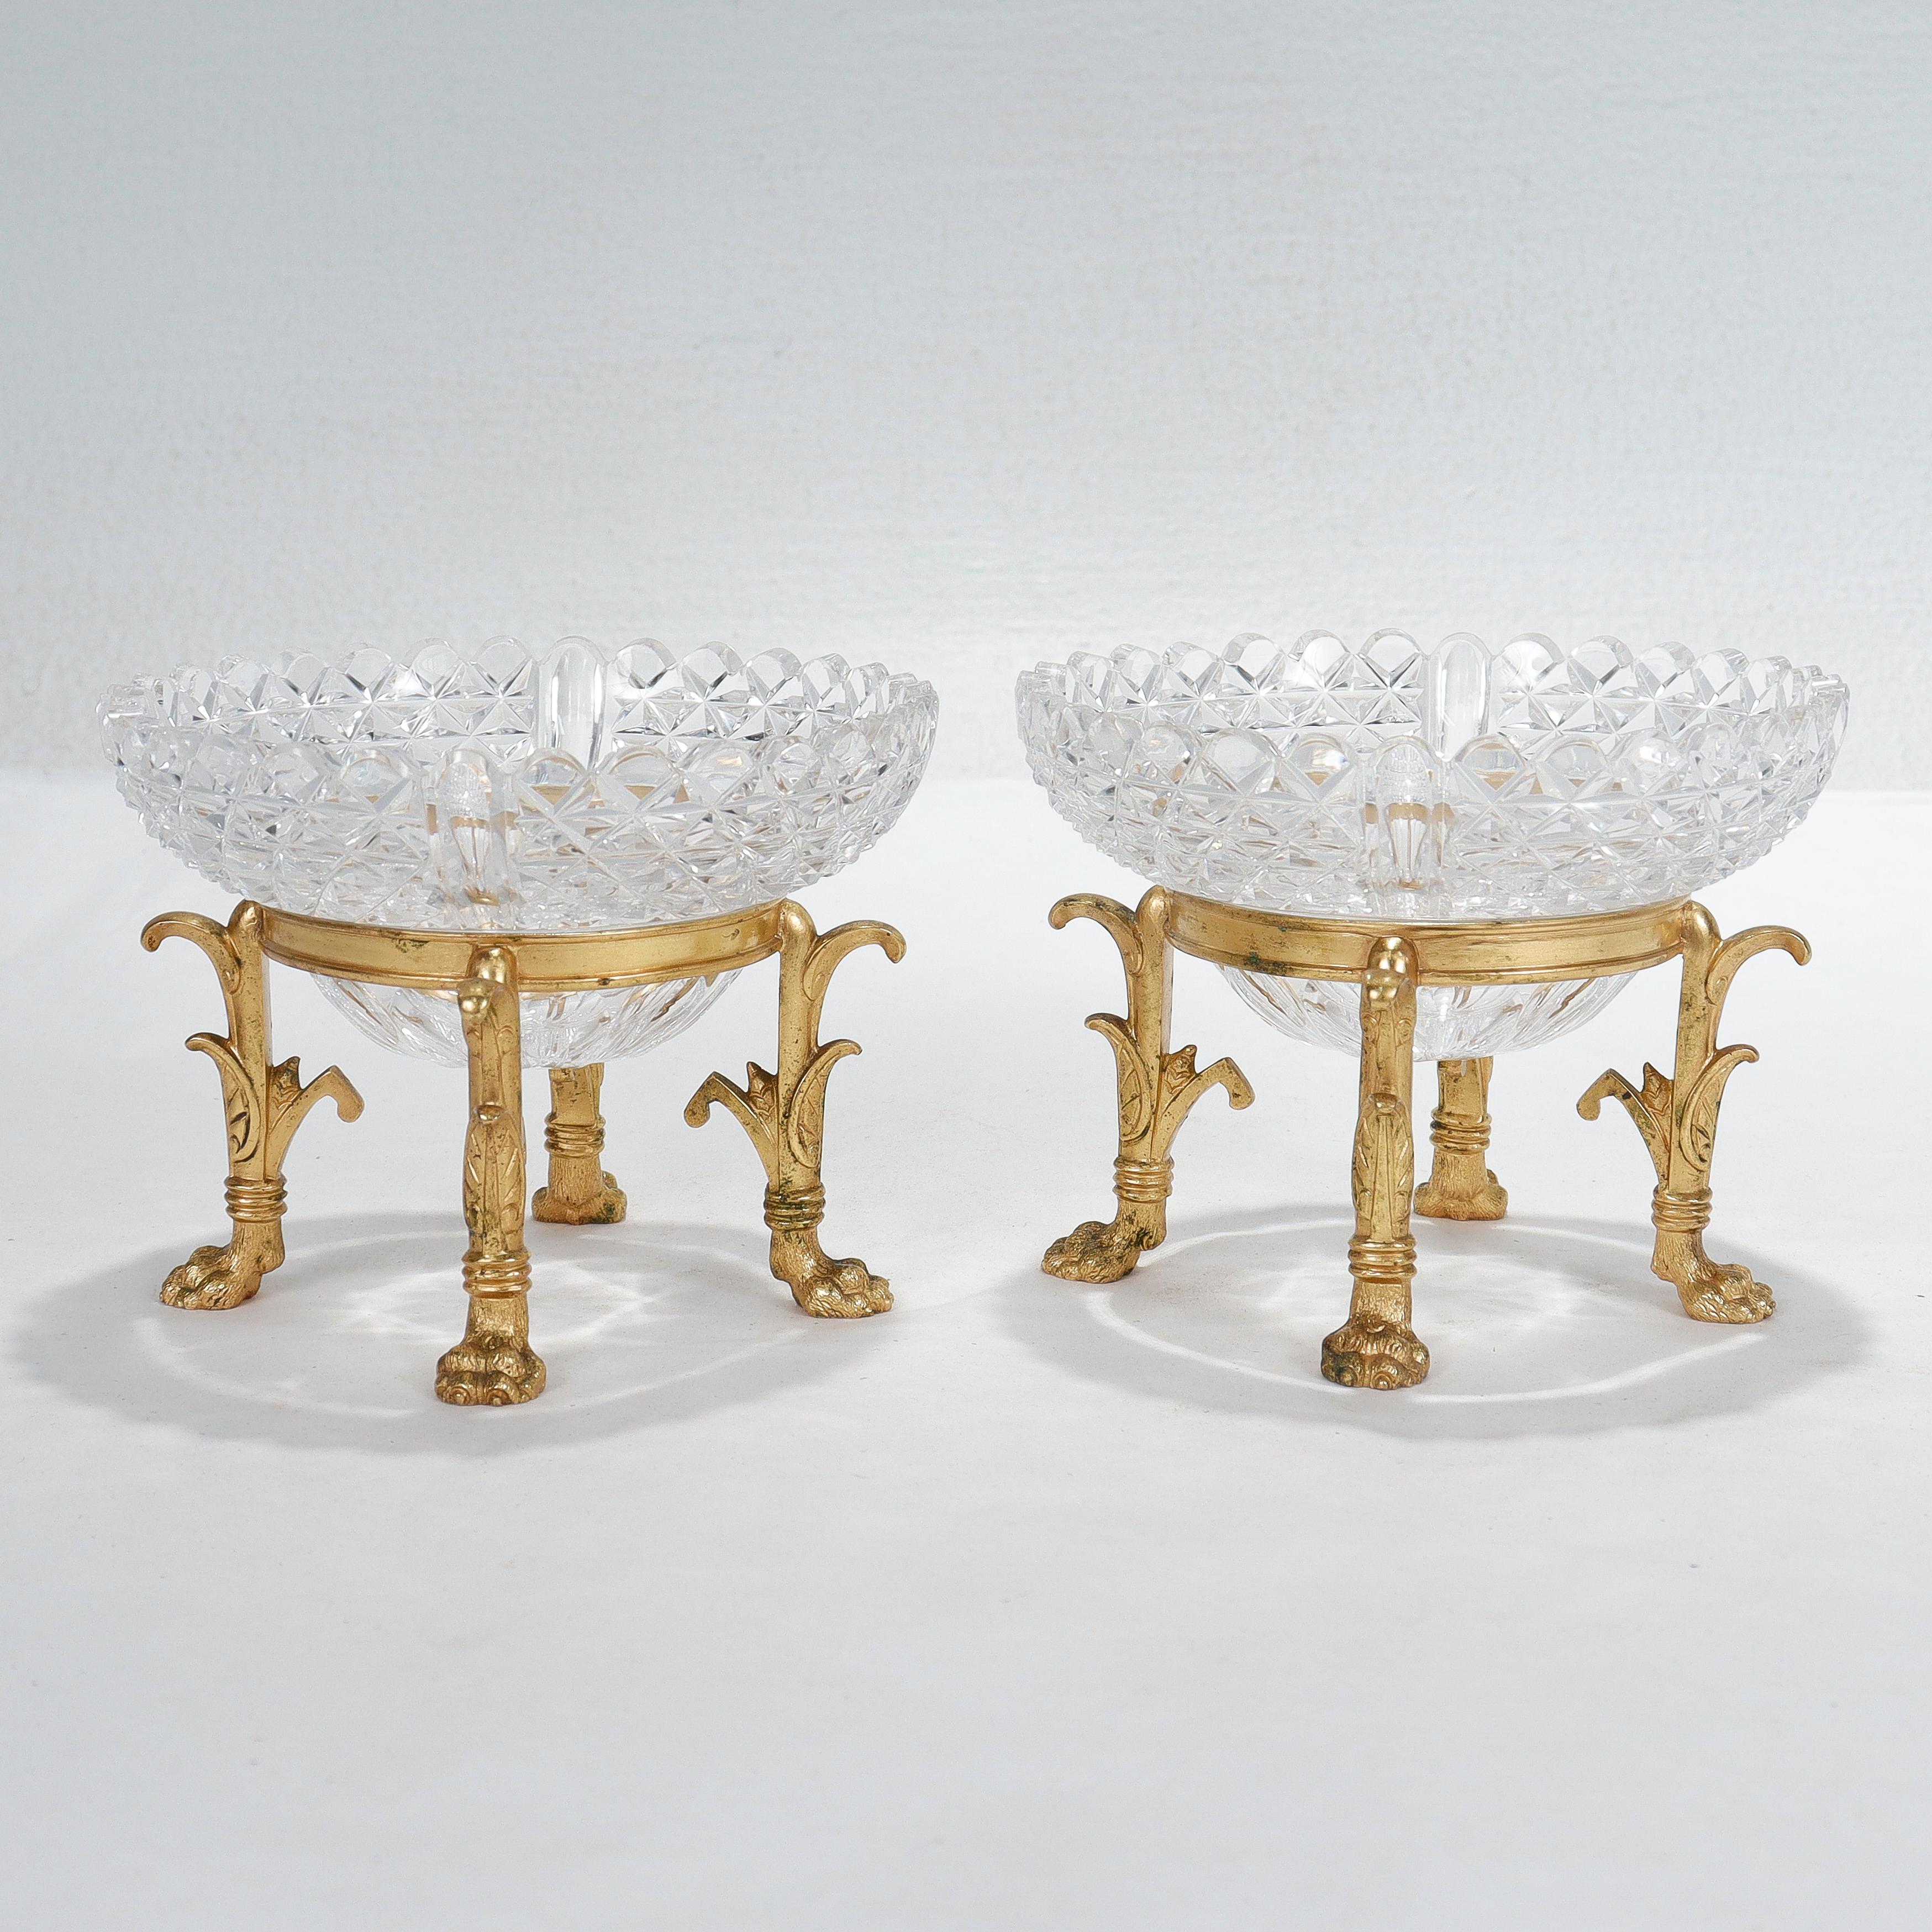 19th Century Pair of Gilt Bronze & Cut Glass Footed Bowls Attributed to F. & C. Osler